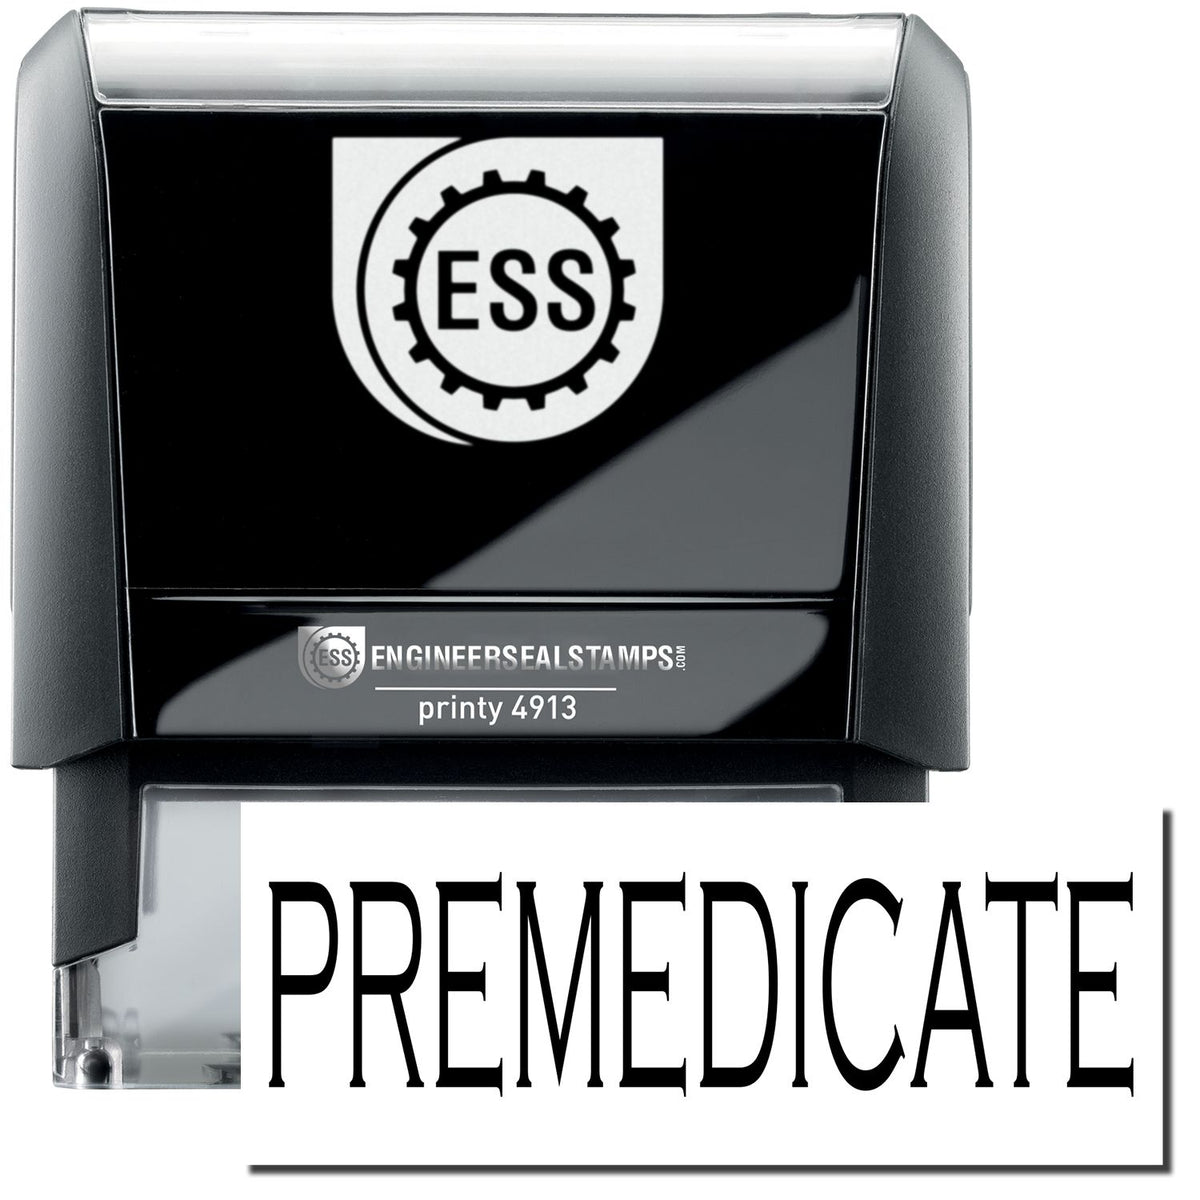 A self-inking stamp with a stamped image showing how the text &quot;PREMEDICATE&quot; in a large bold font is displayed by it.